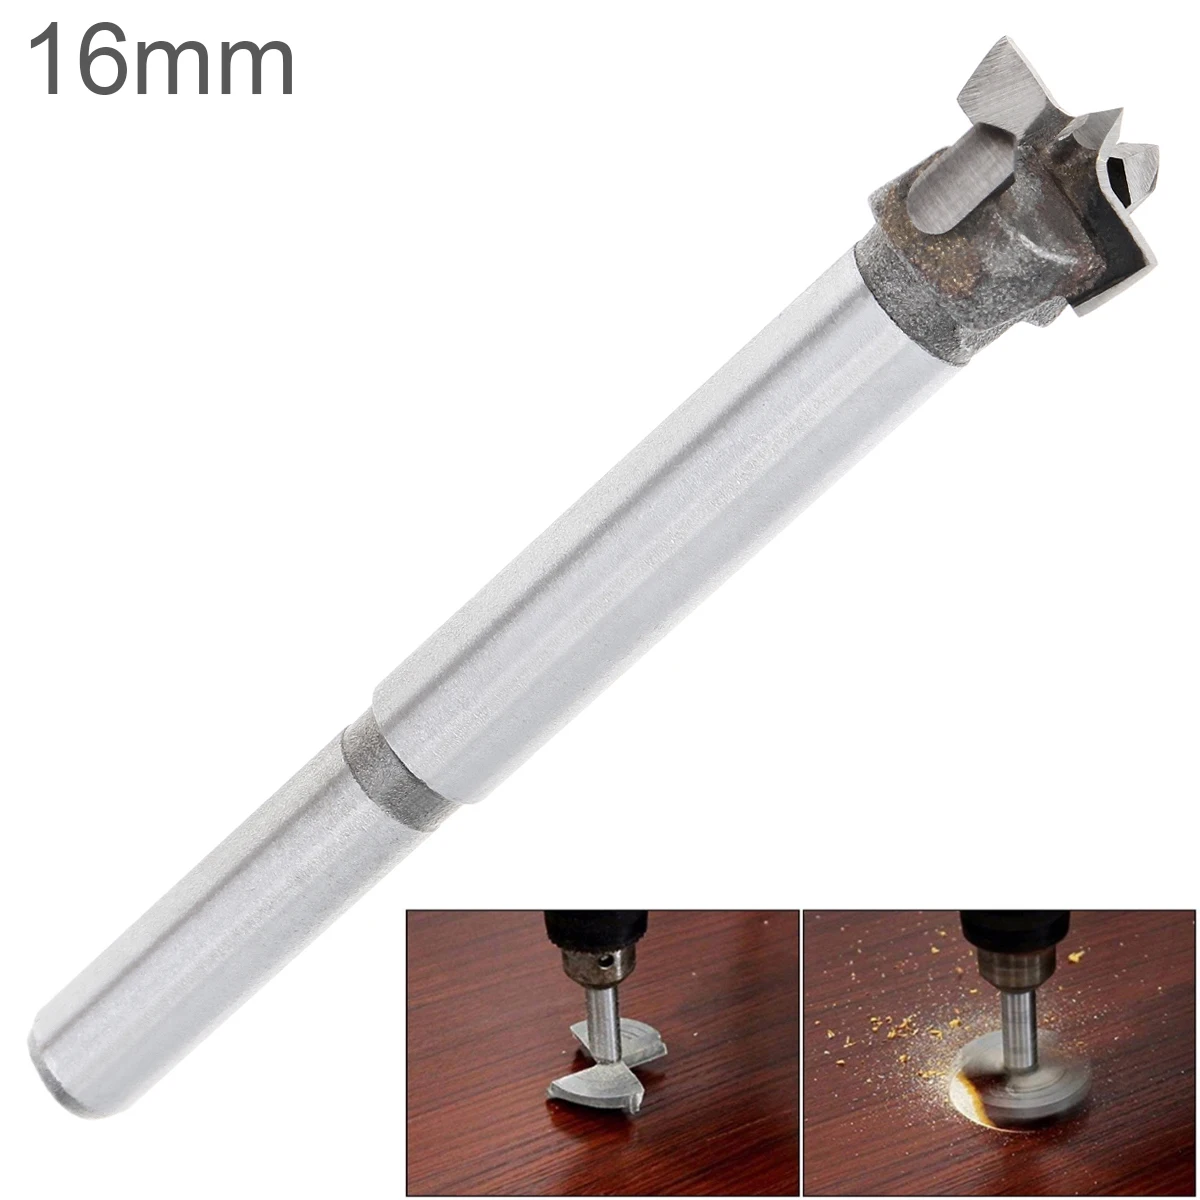 16mm Tungsten Steel Hard Alloy Wood Drill Bits Woodworking Hole Opener for Drilling on Plasterboard /Plastic Board /Wooden Board 5pcs 31 52mm hole saw drill bits set chrome vanadium steel plasterboard wood hole cutter woodworking diy drilling tools